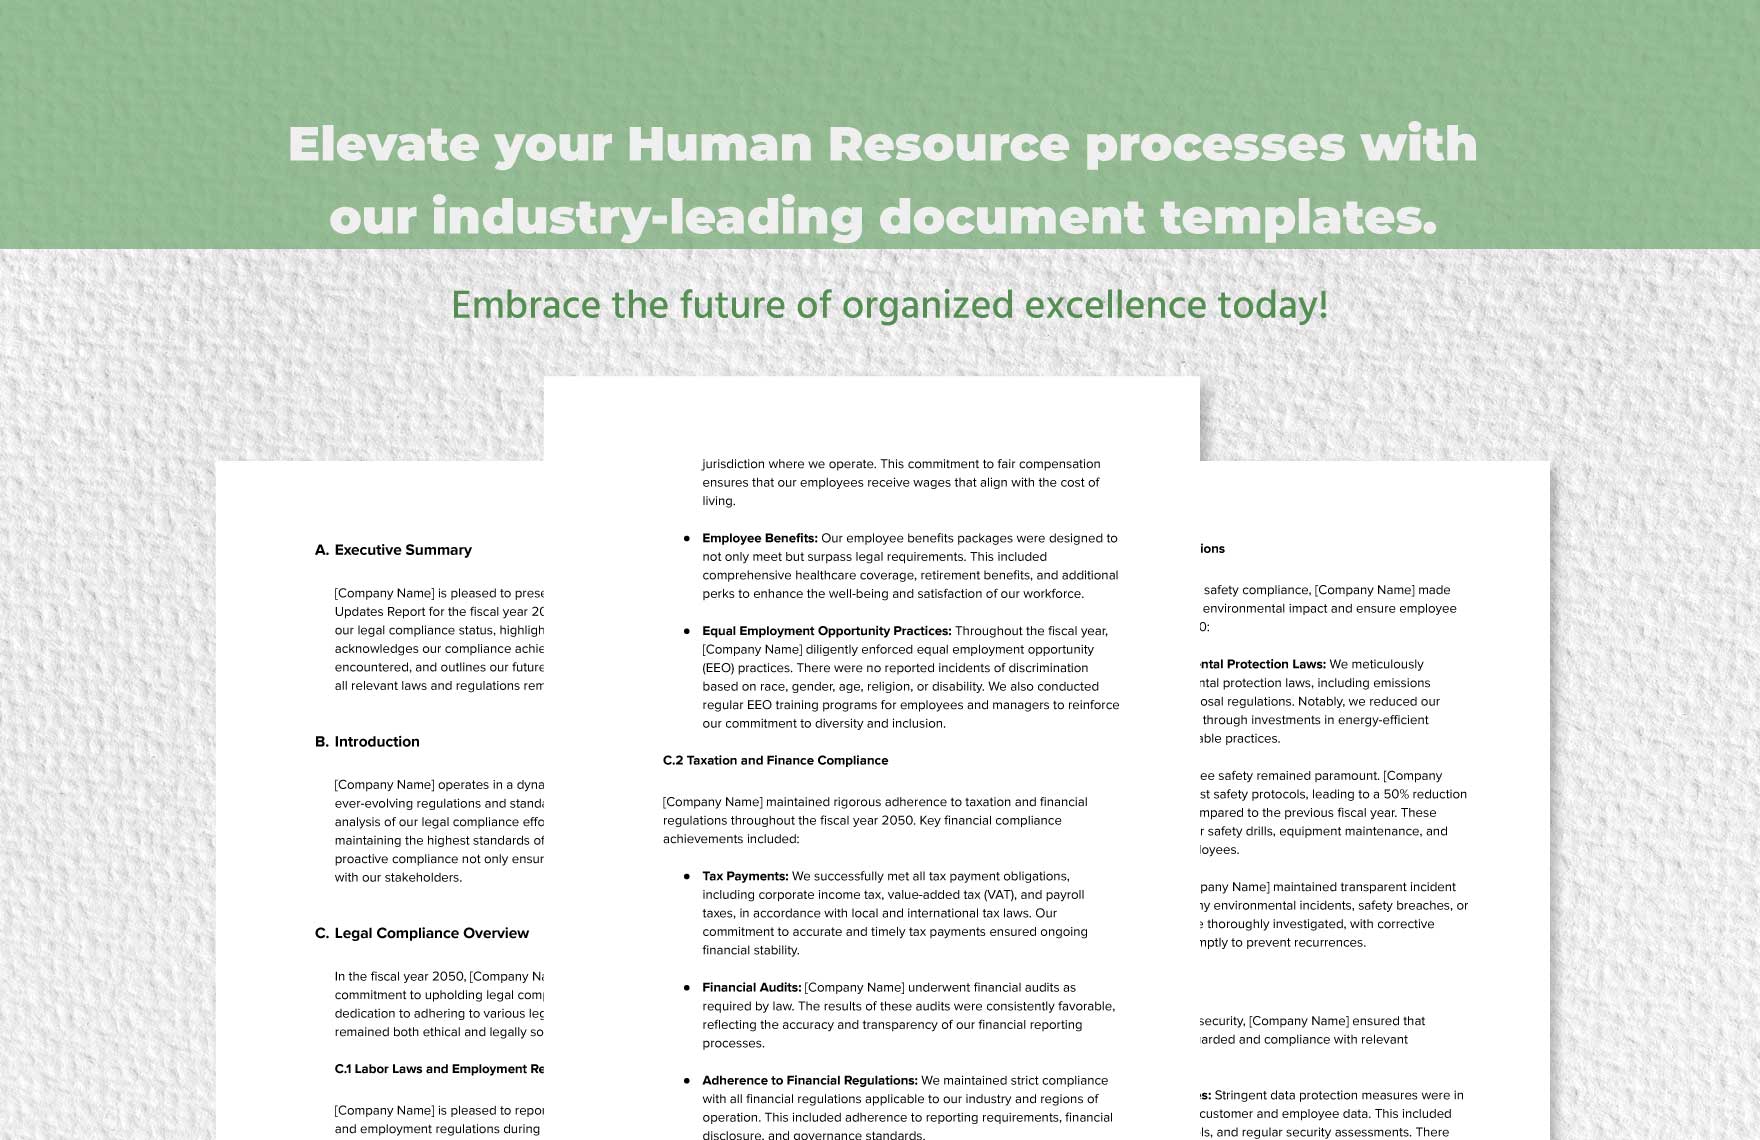 Yearend Legal Compliance and Updates Report HR Template